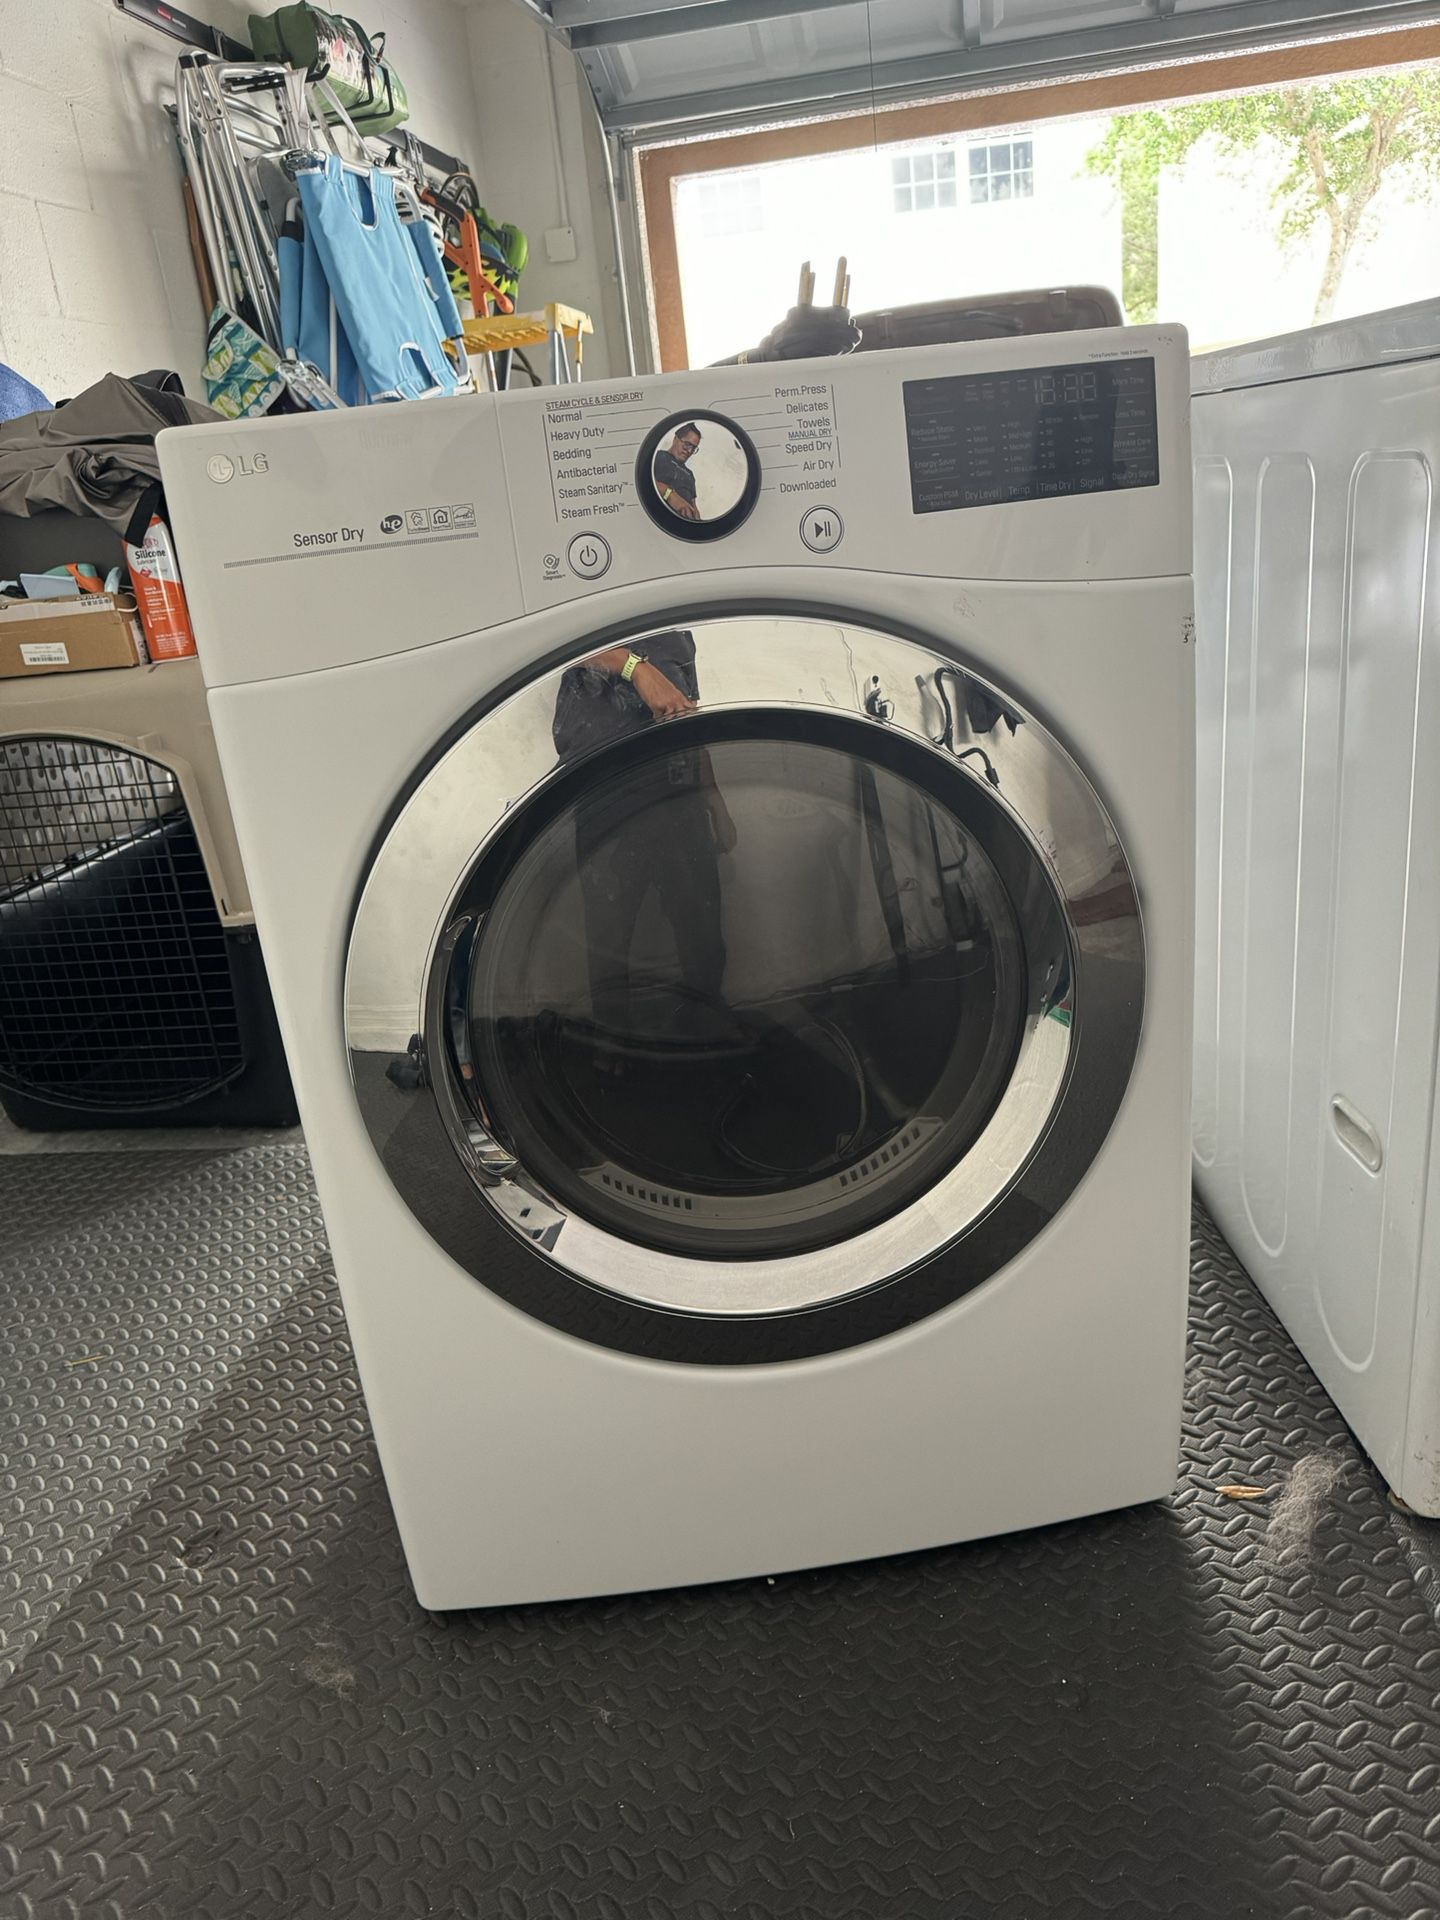 LG WASHER AND DRYER FOR SALE - Light Use And In Great Condition!